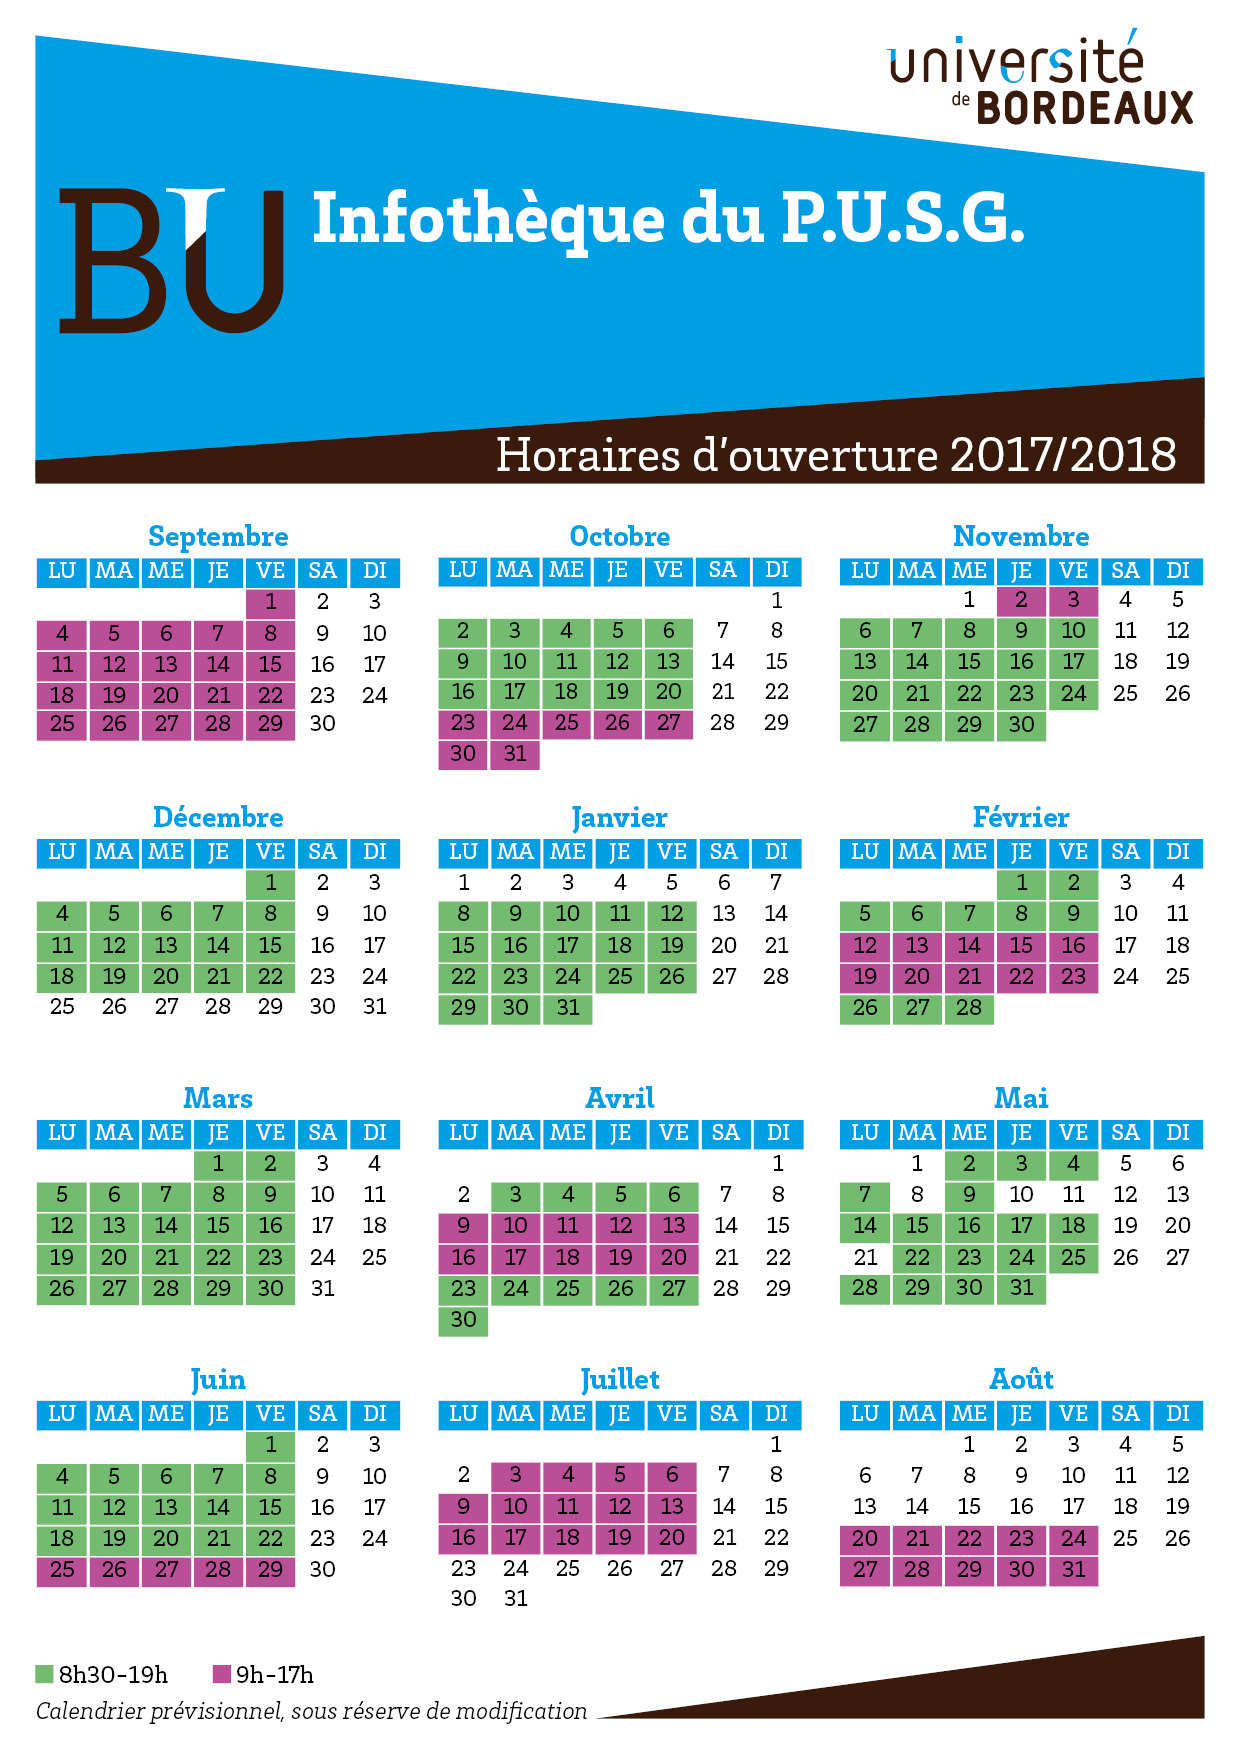 Horaires infotheque 2017-2018 v2